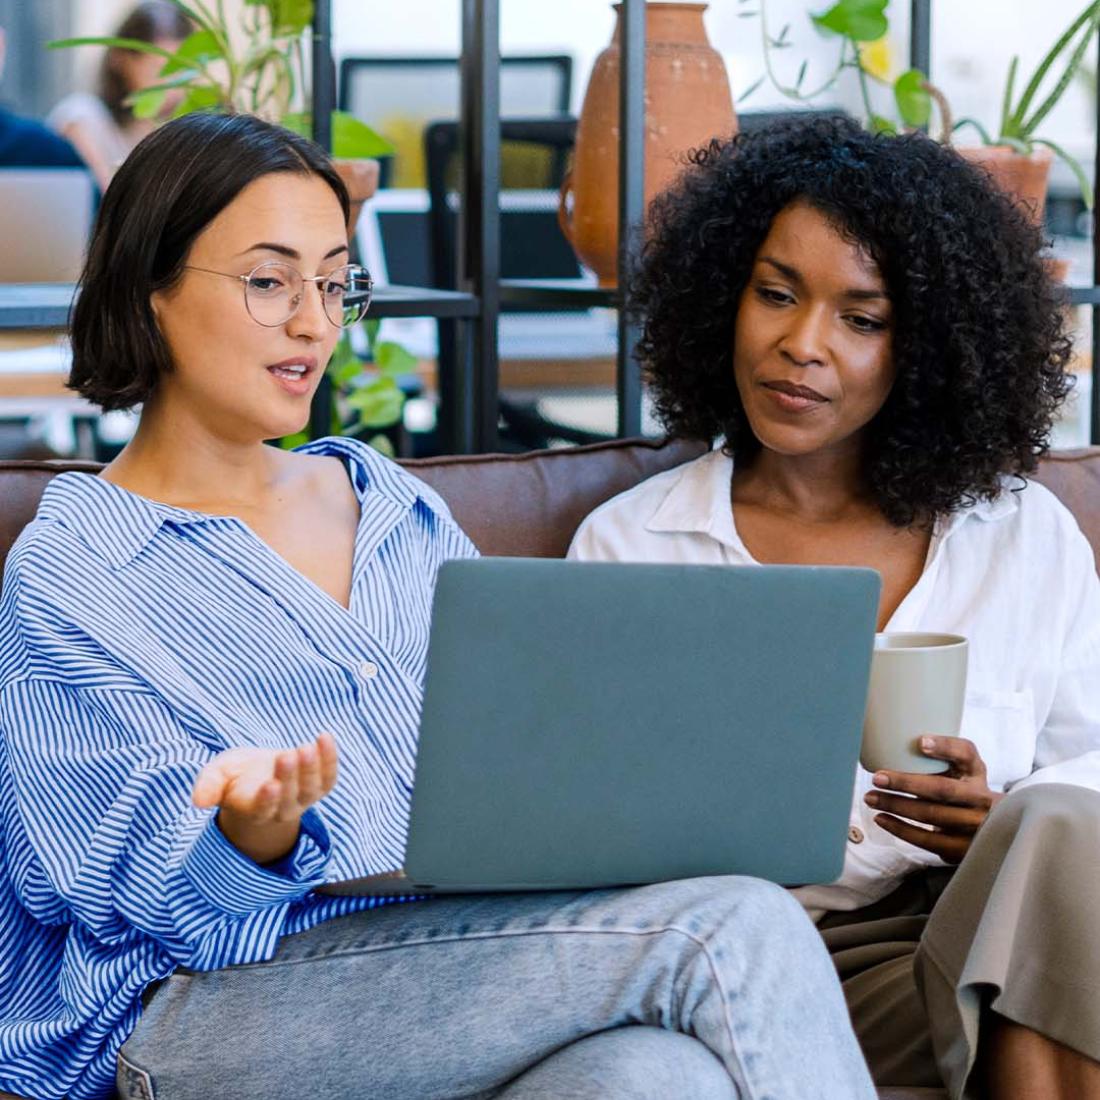 image of two women looking at a laptop